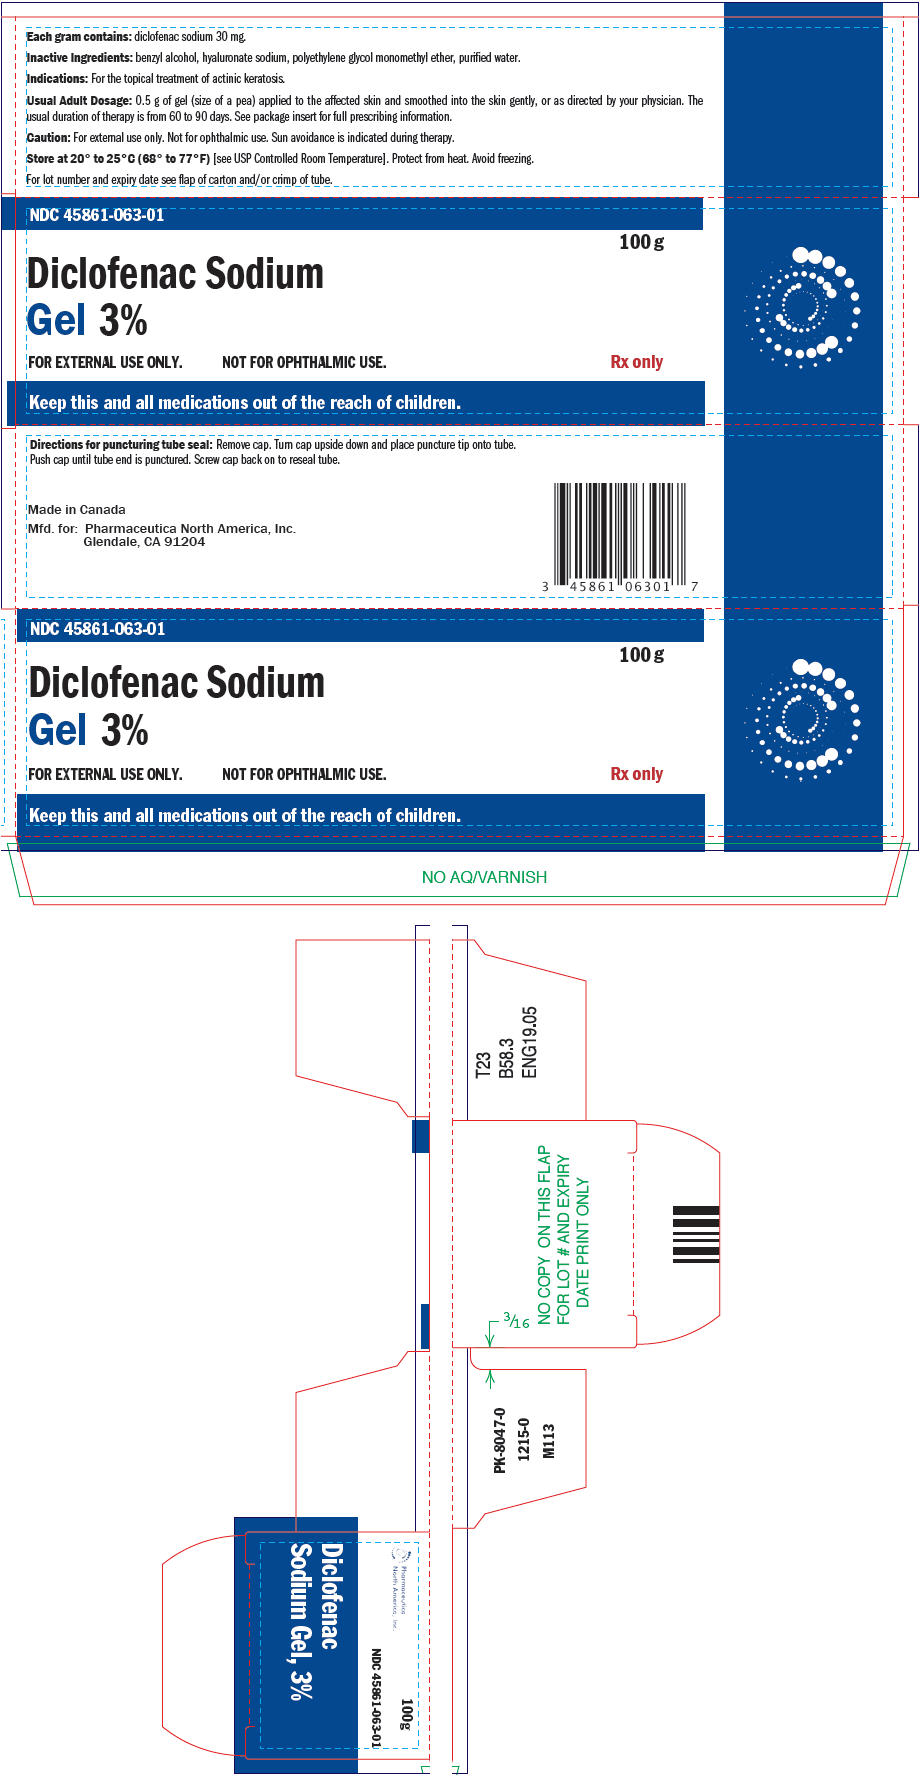 Goodrx coupon for gabapentin